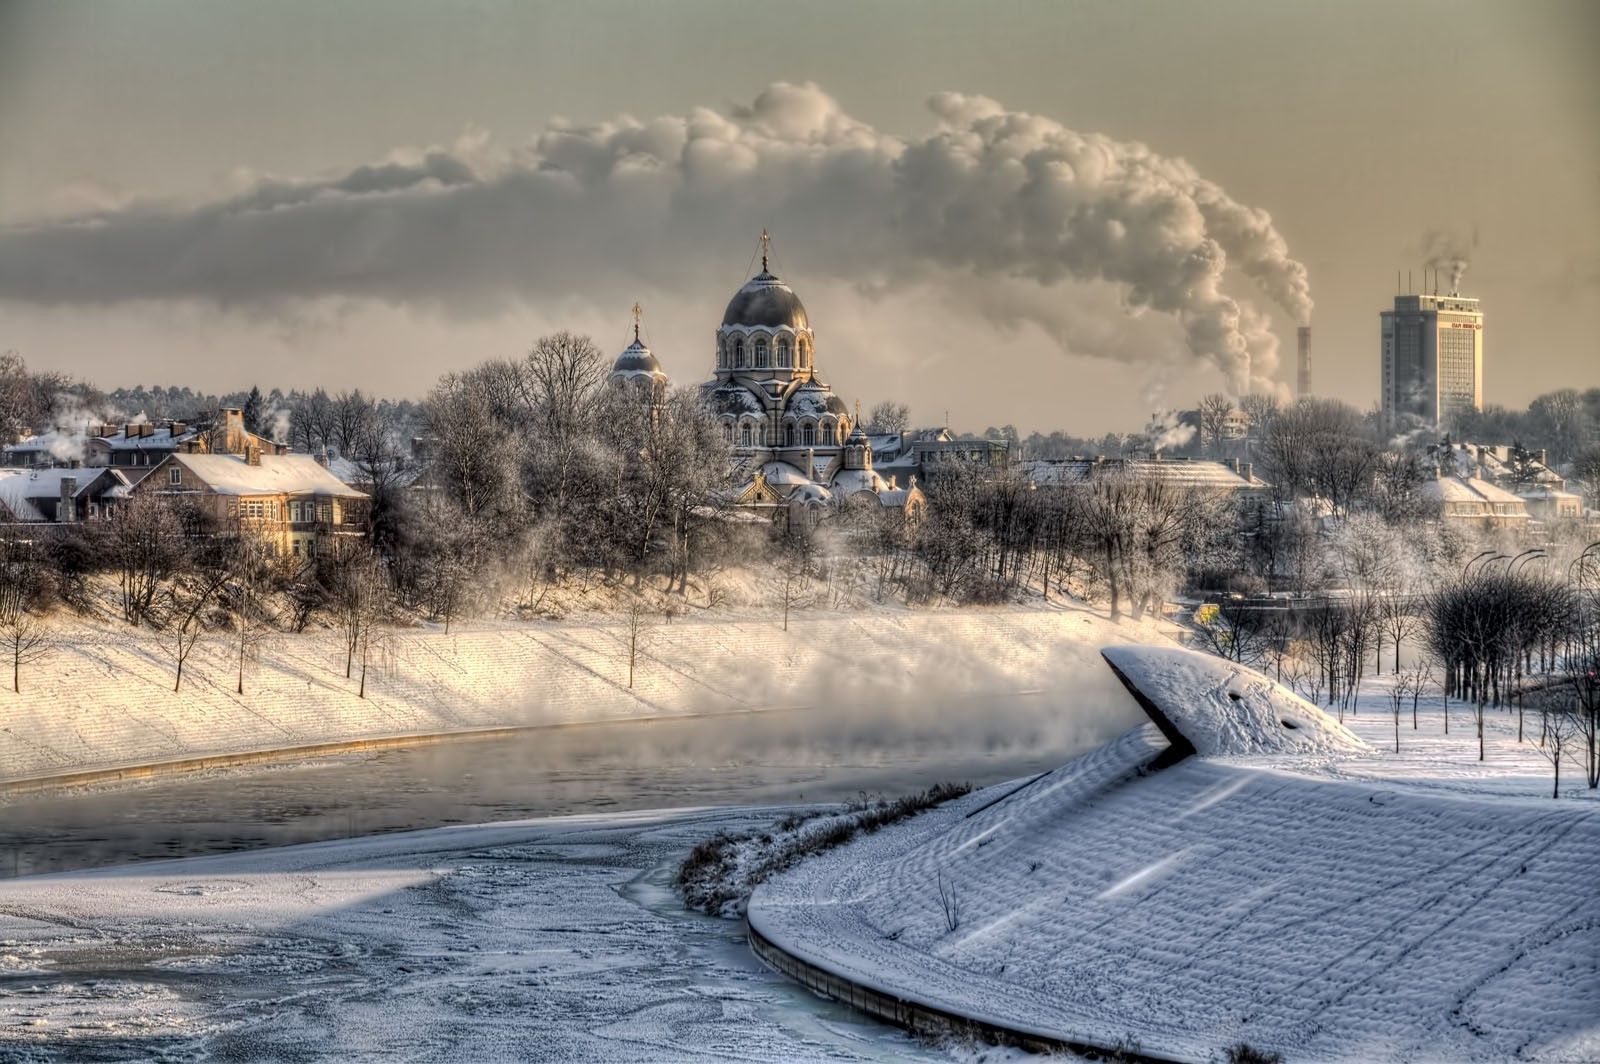 architecture, City, Cityscape, Trees, Building, Lithuania, Landscape, Winter, Snow, Cathedral, Smoke, Chimneys, Frost, Frozen River Wallpaper HD / Desktop and Mobile Background